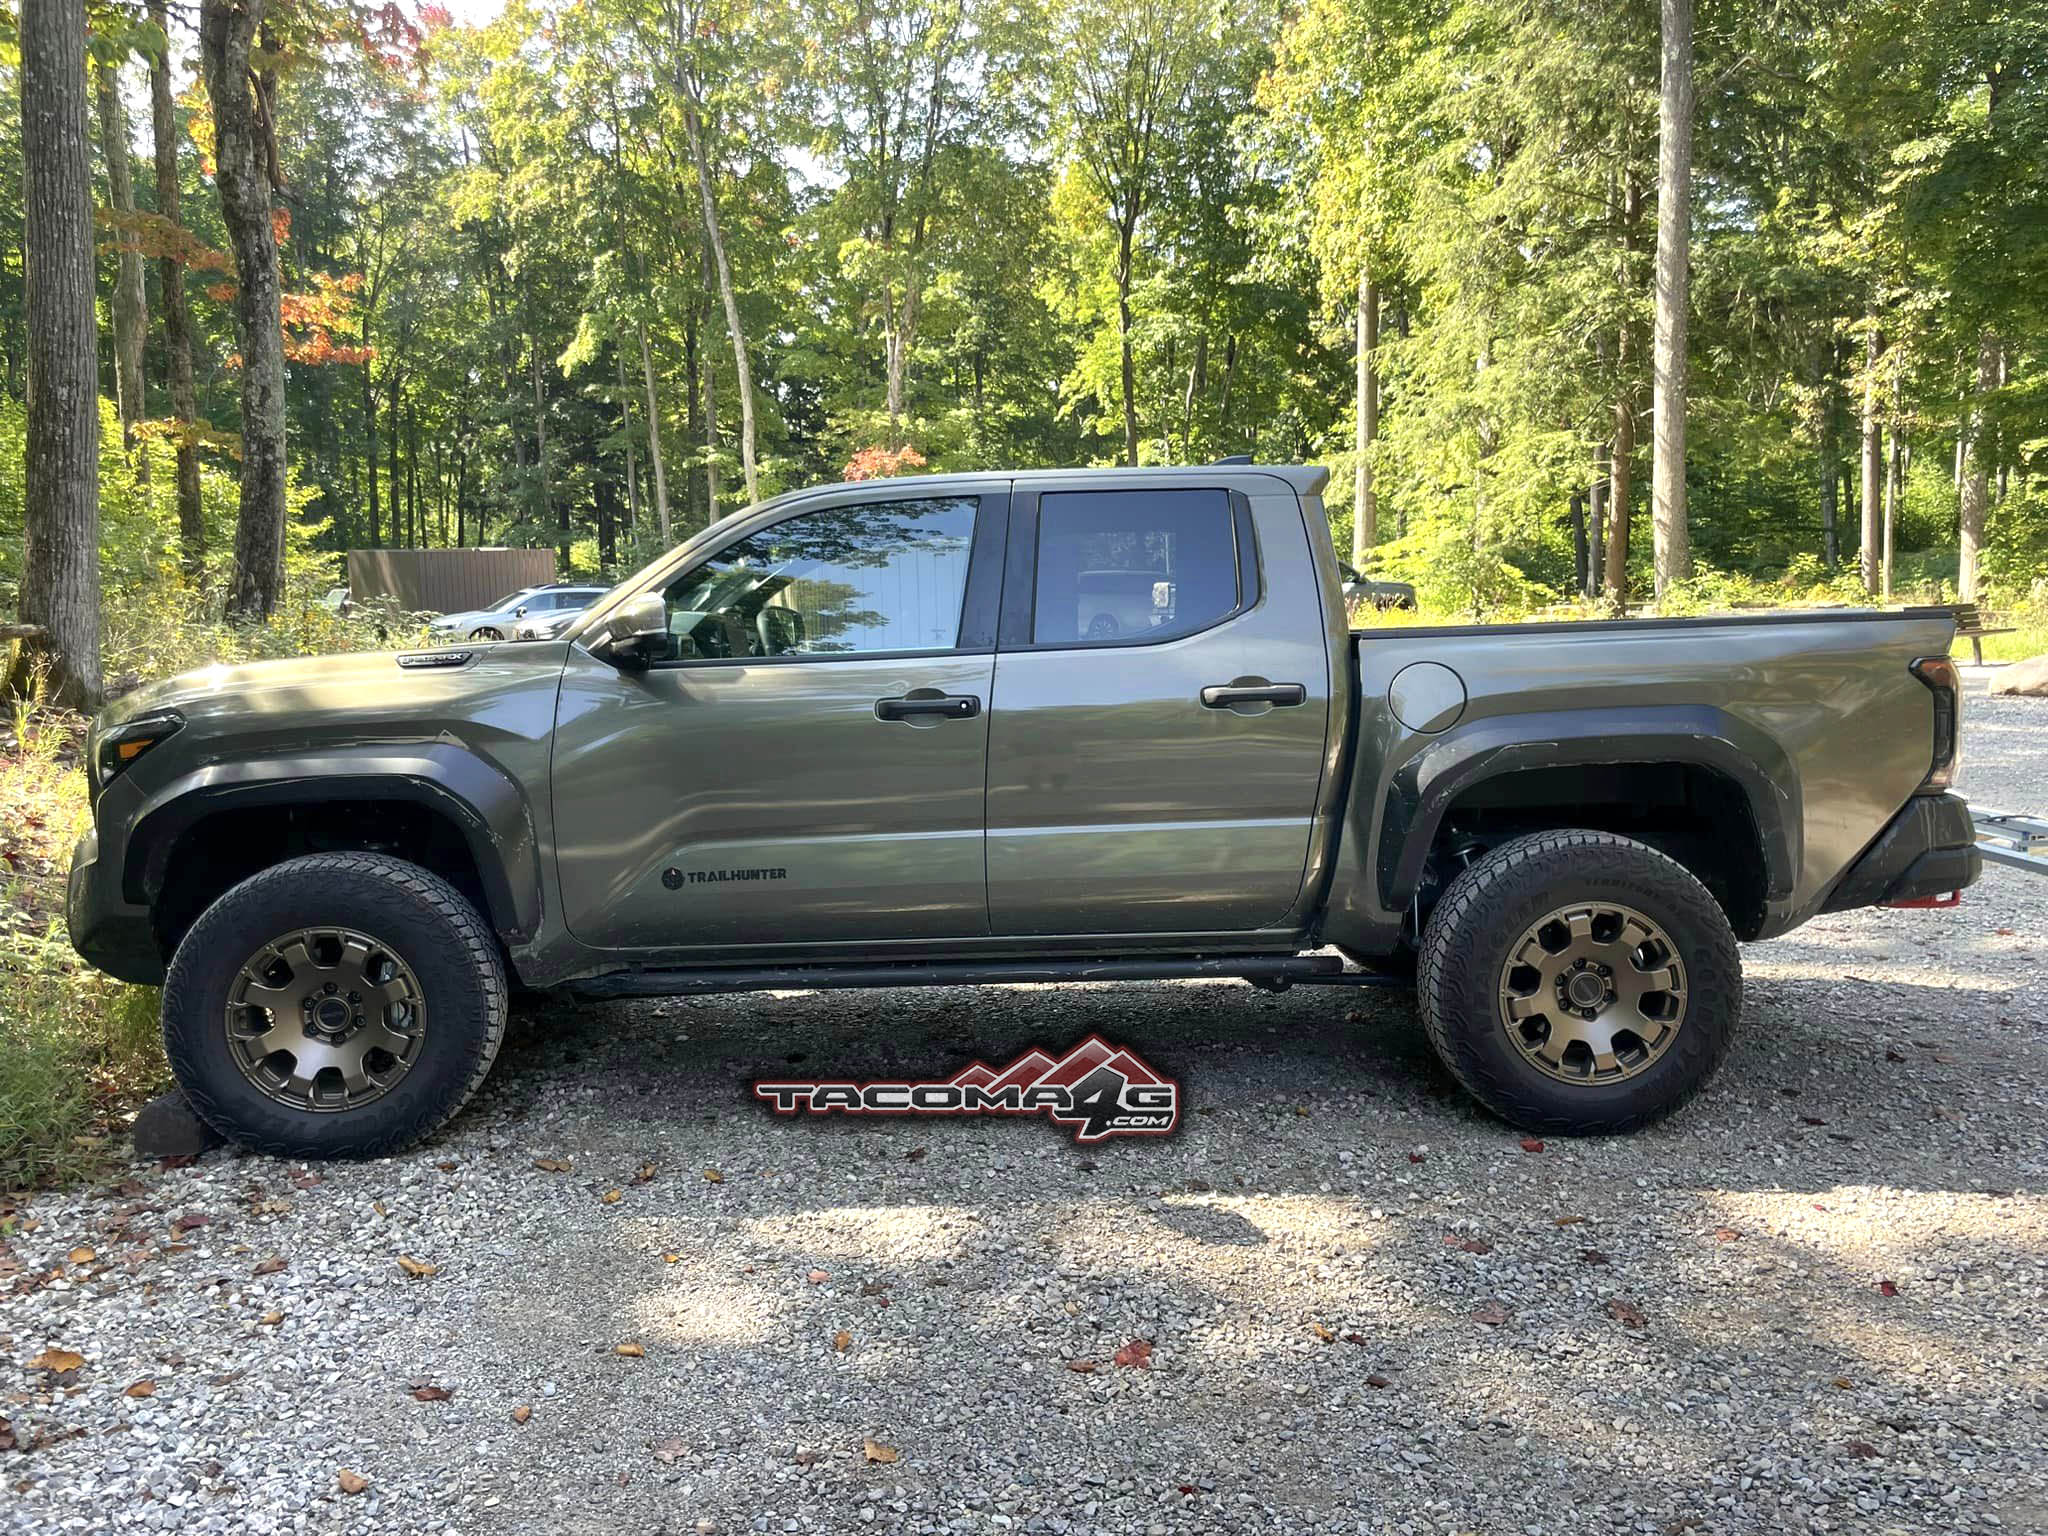 2024 Tacoma Short Bed (5' Foot) 2024 Tacoma first sighting! (Bronze Oxide Trailhunter spotted in wild) 5 foot Short Bed 2024 Toyota Tacoma Trail hunter Bronze Oxide 2